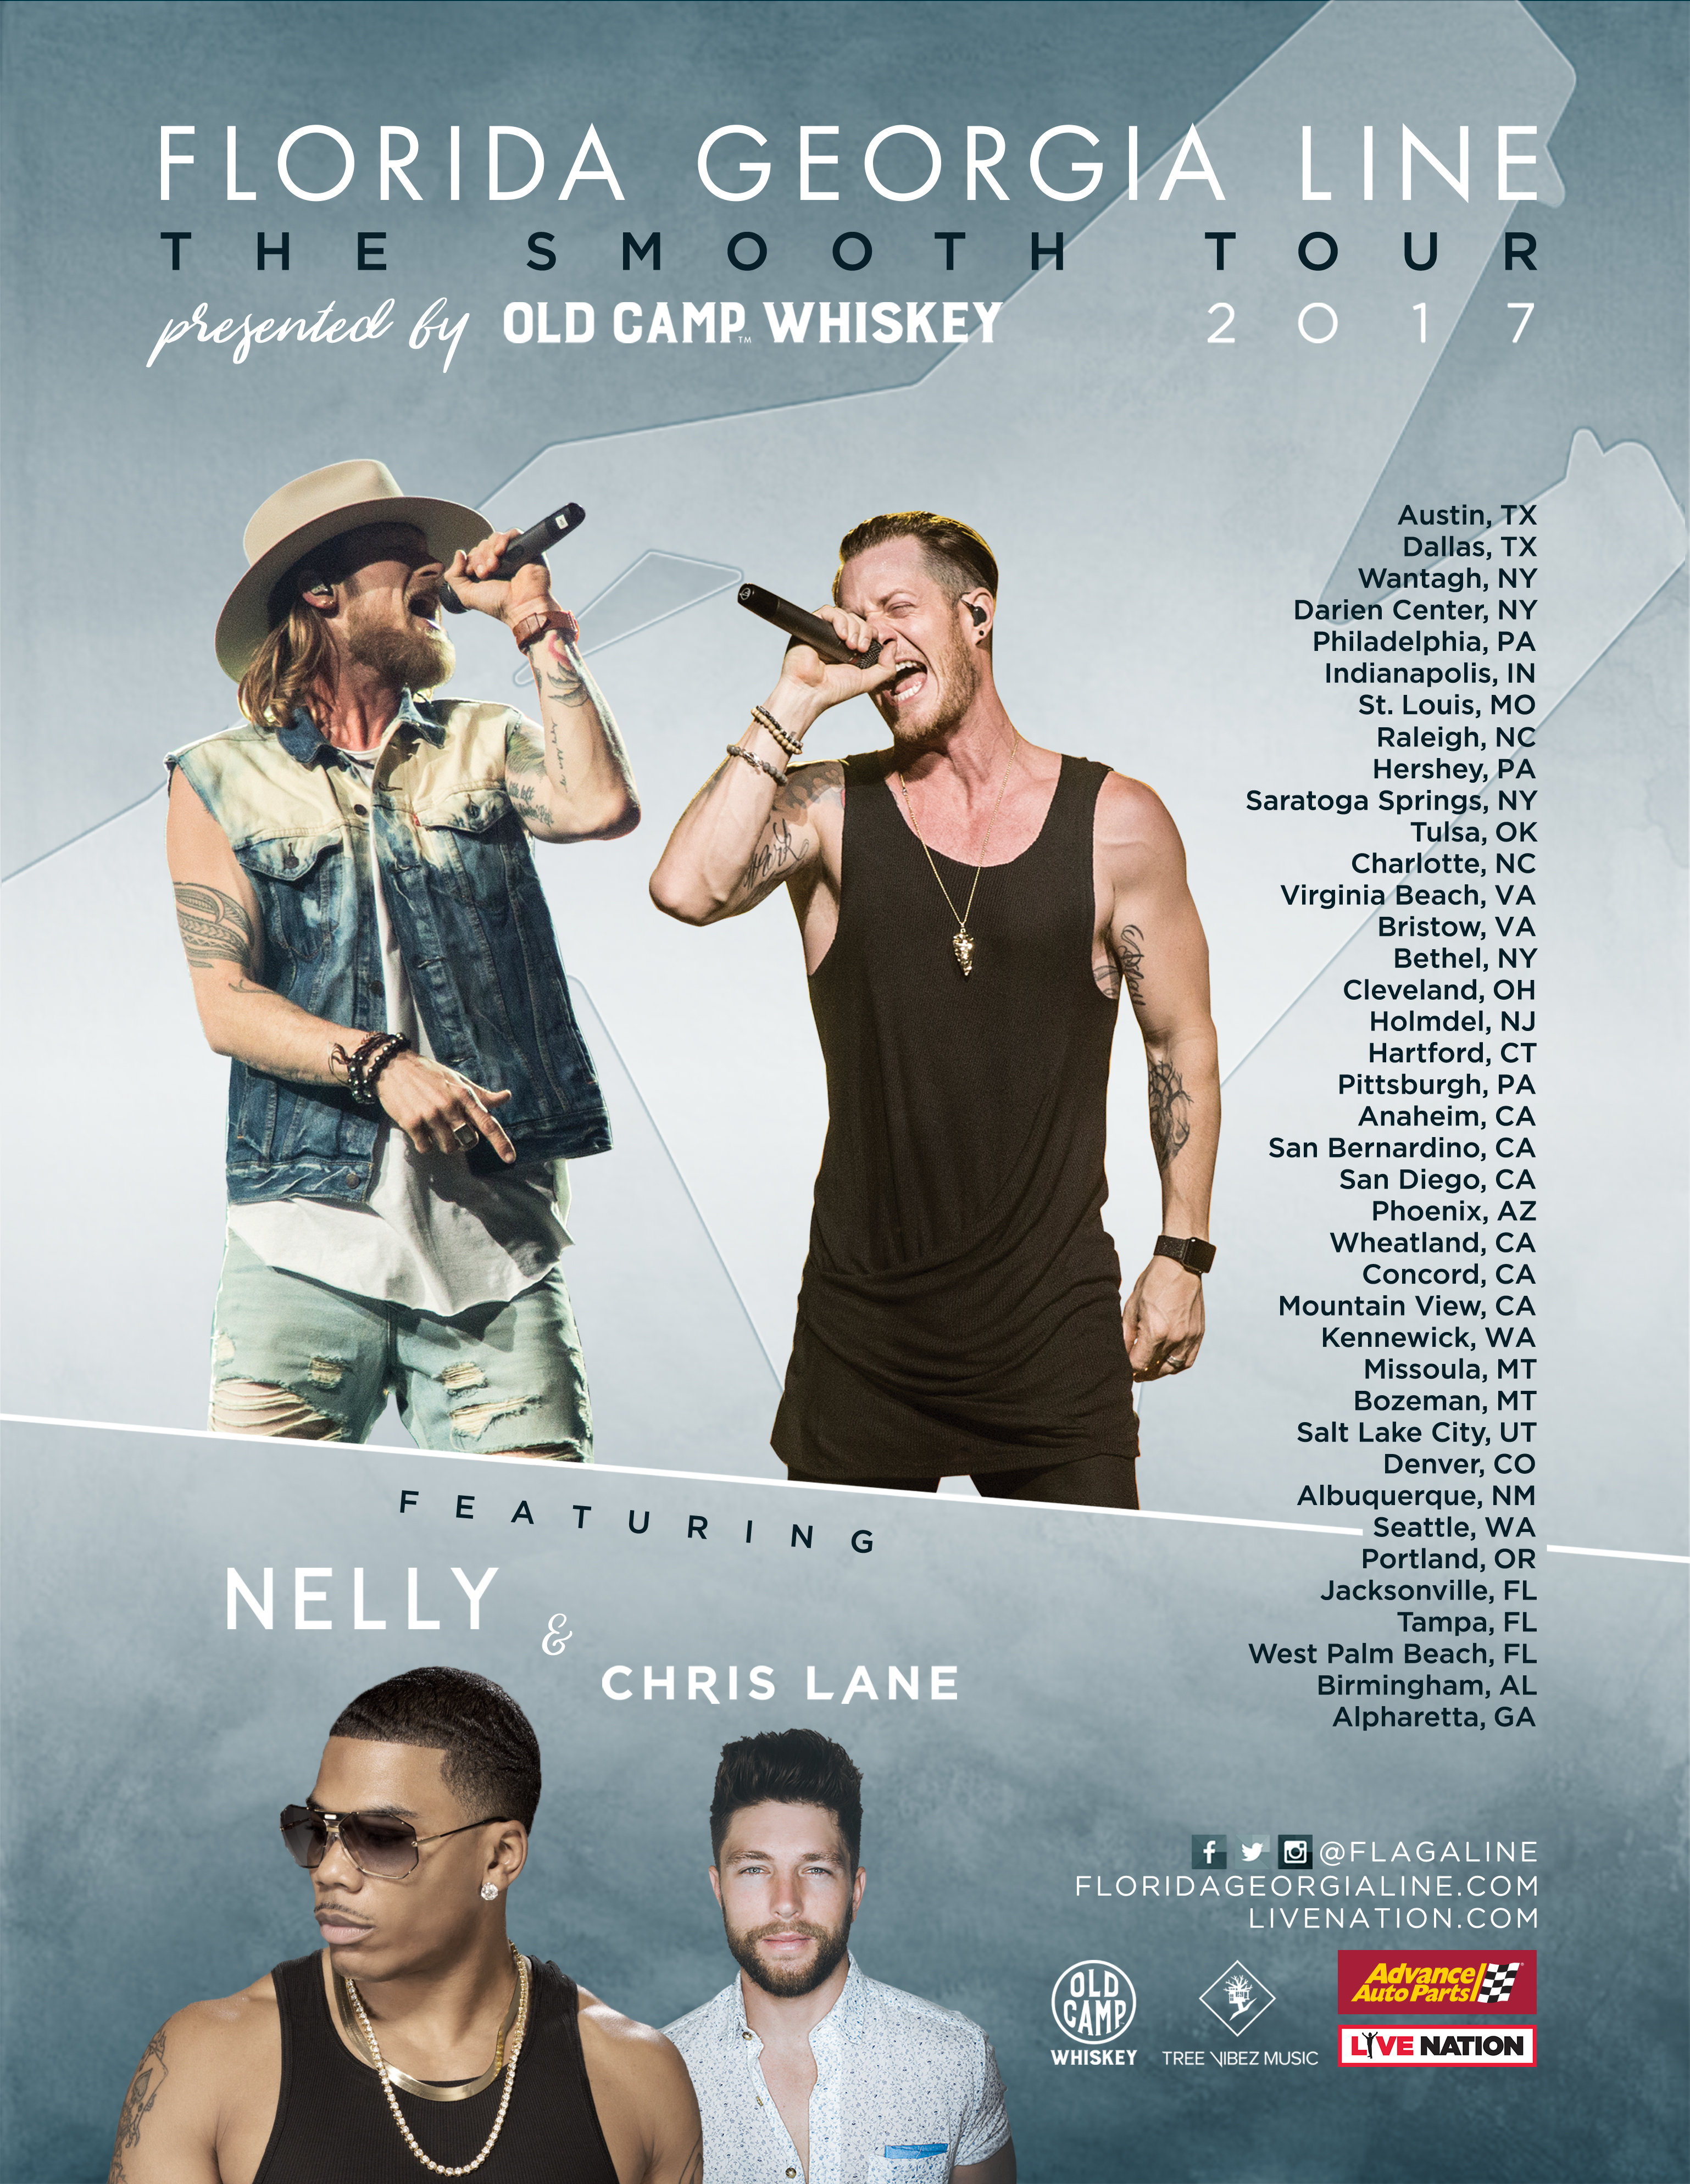 Florida Georgia Line Announces Summer Tour with Nelly and Chris Lane